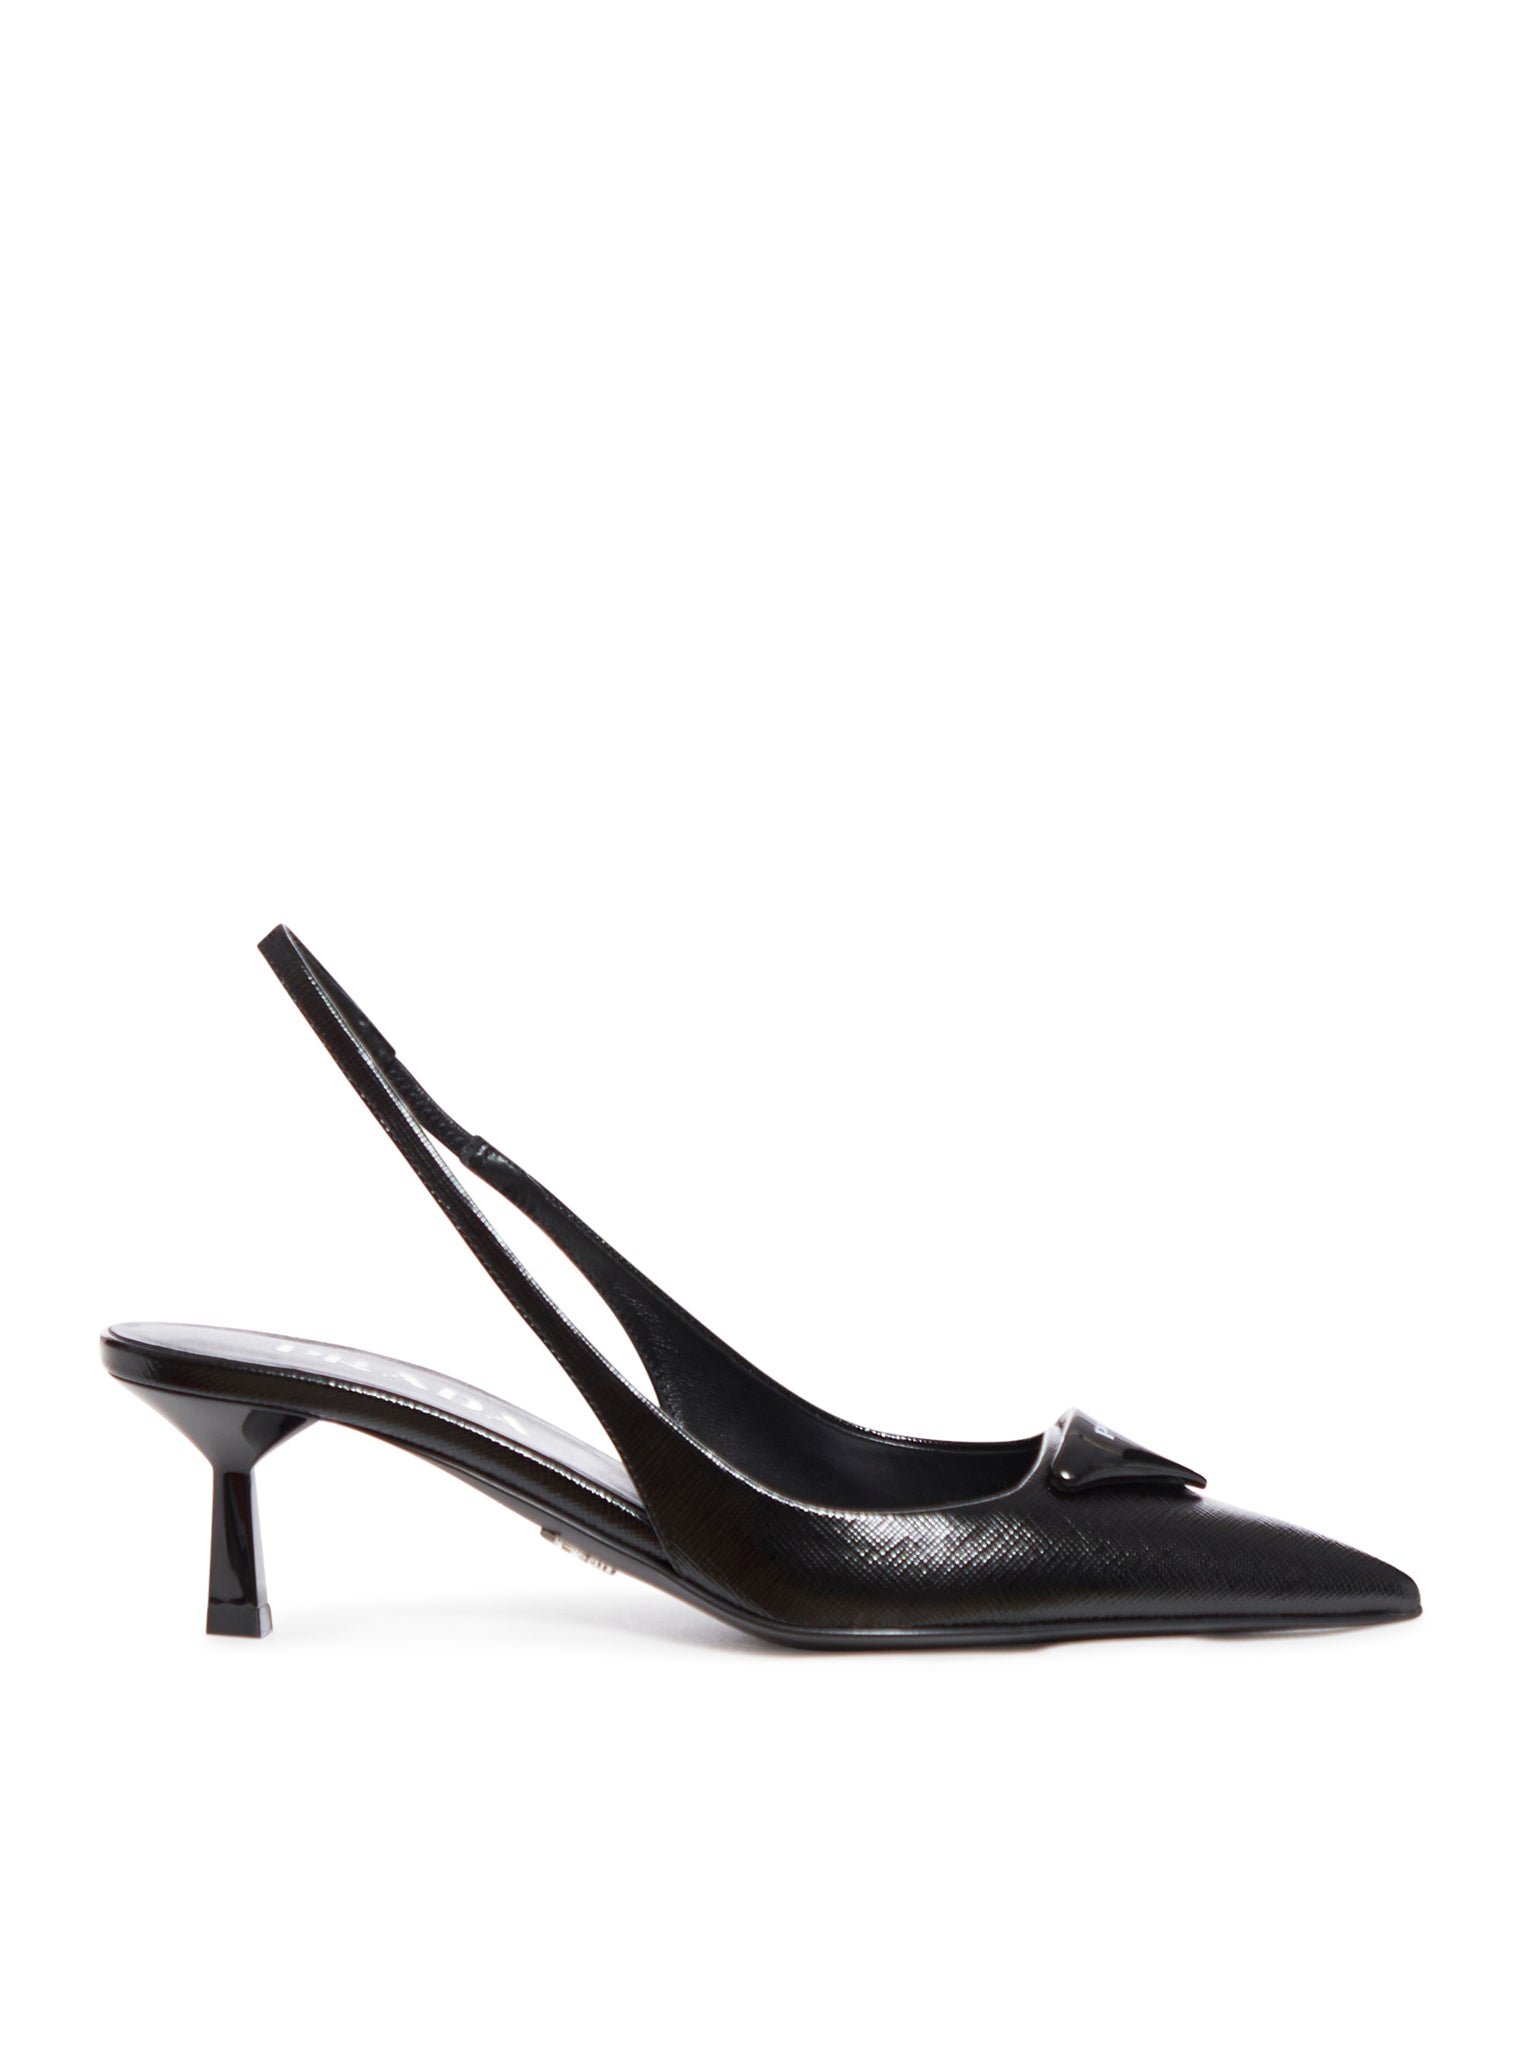 Slingback pumps in blown leather